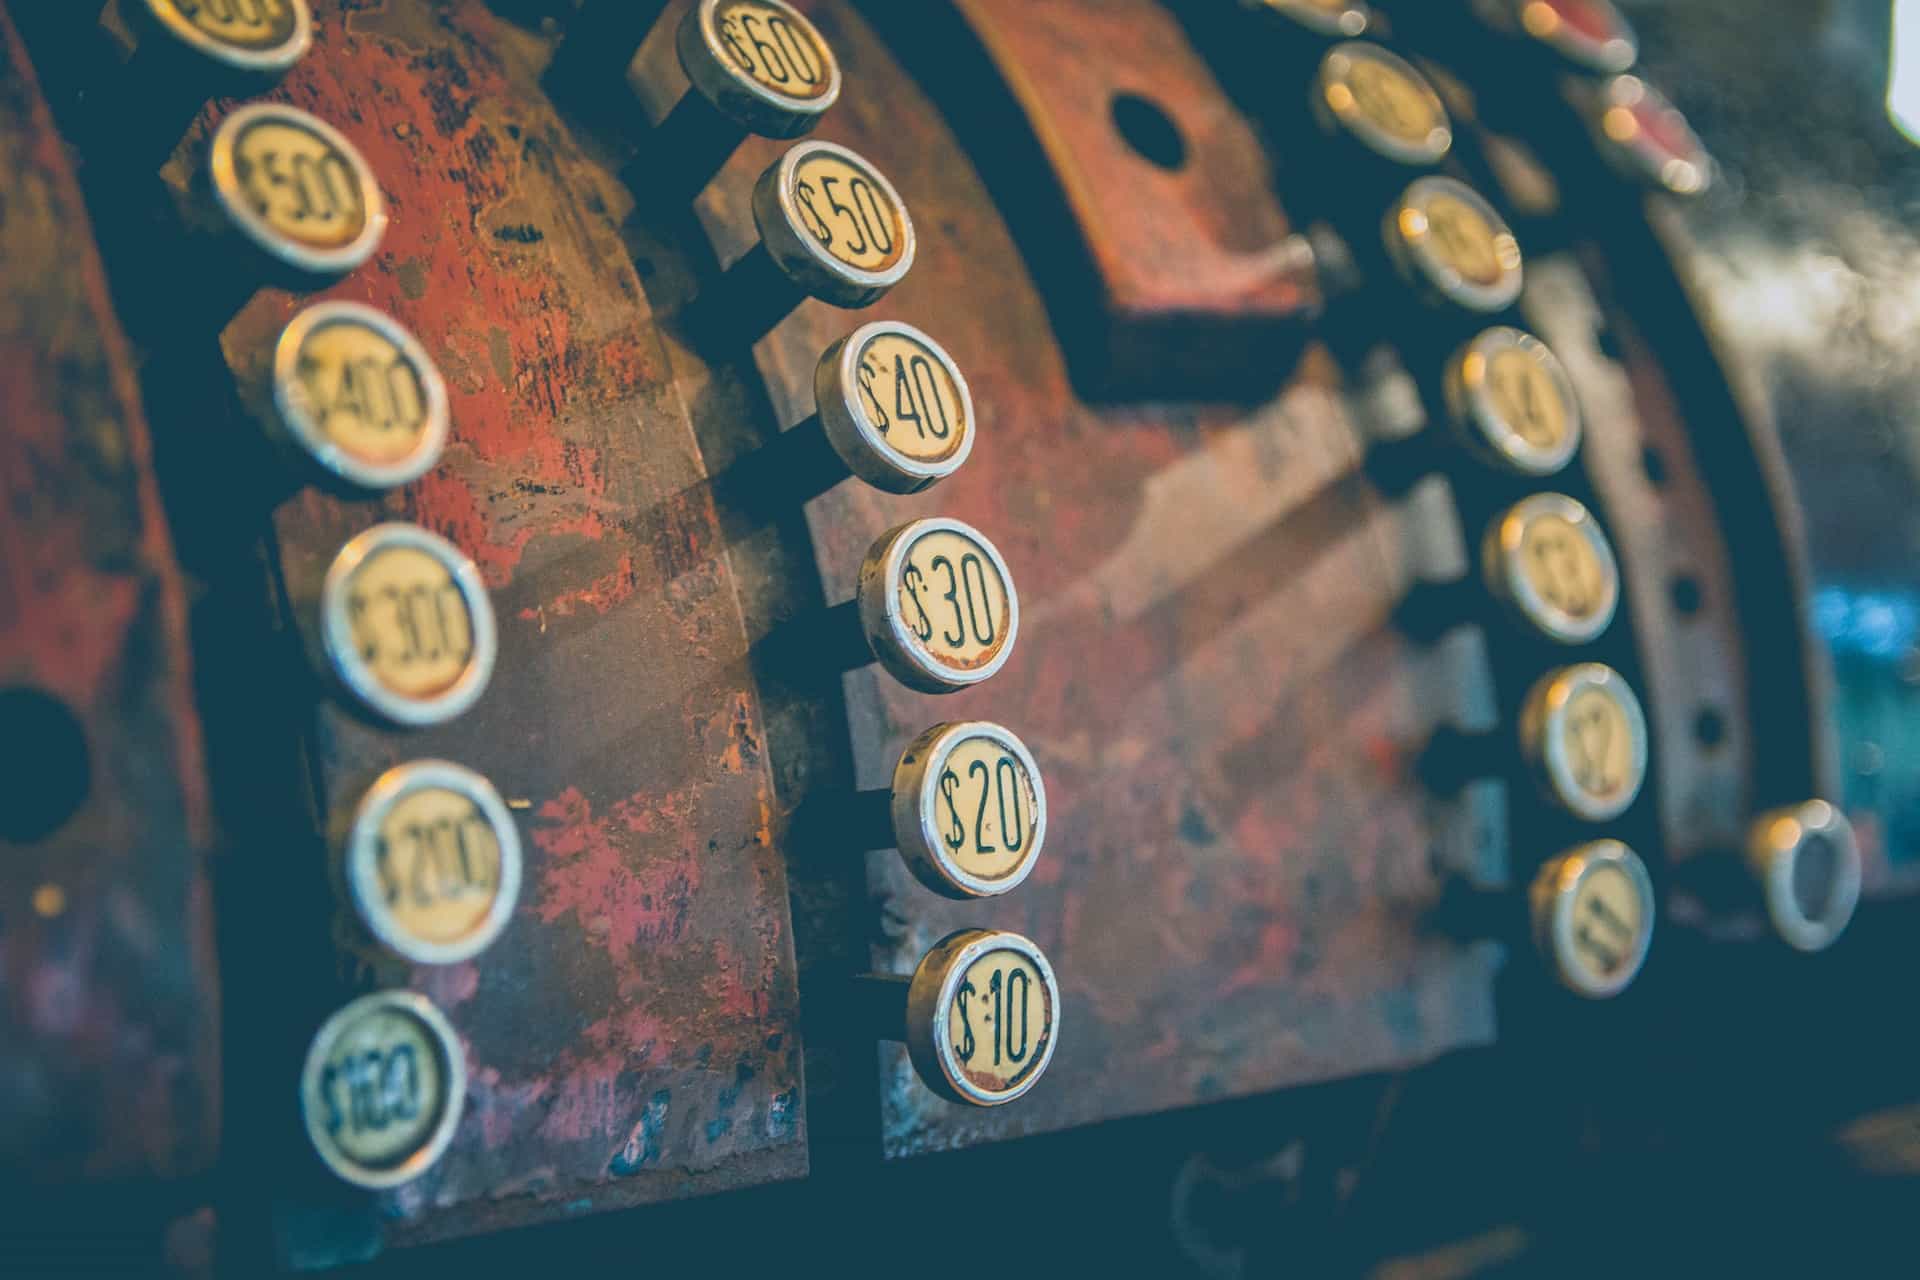 Number buttons on a vintage slot machine.